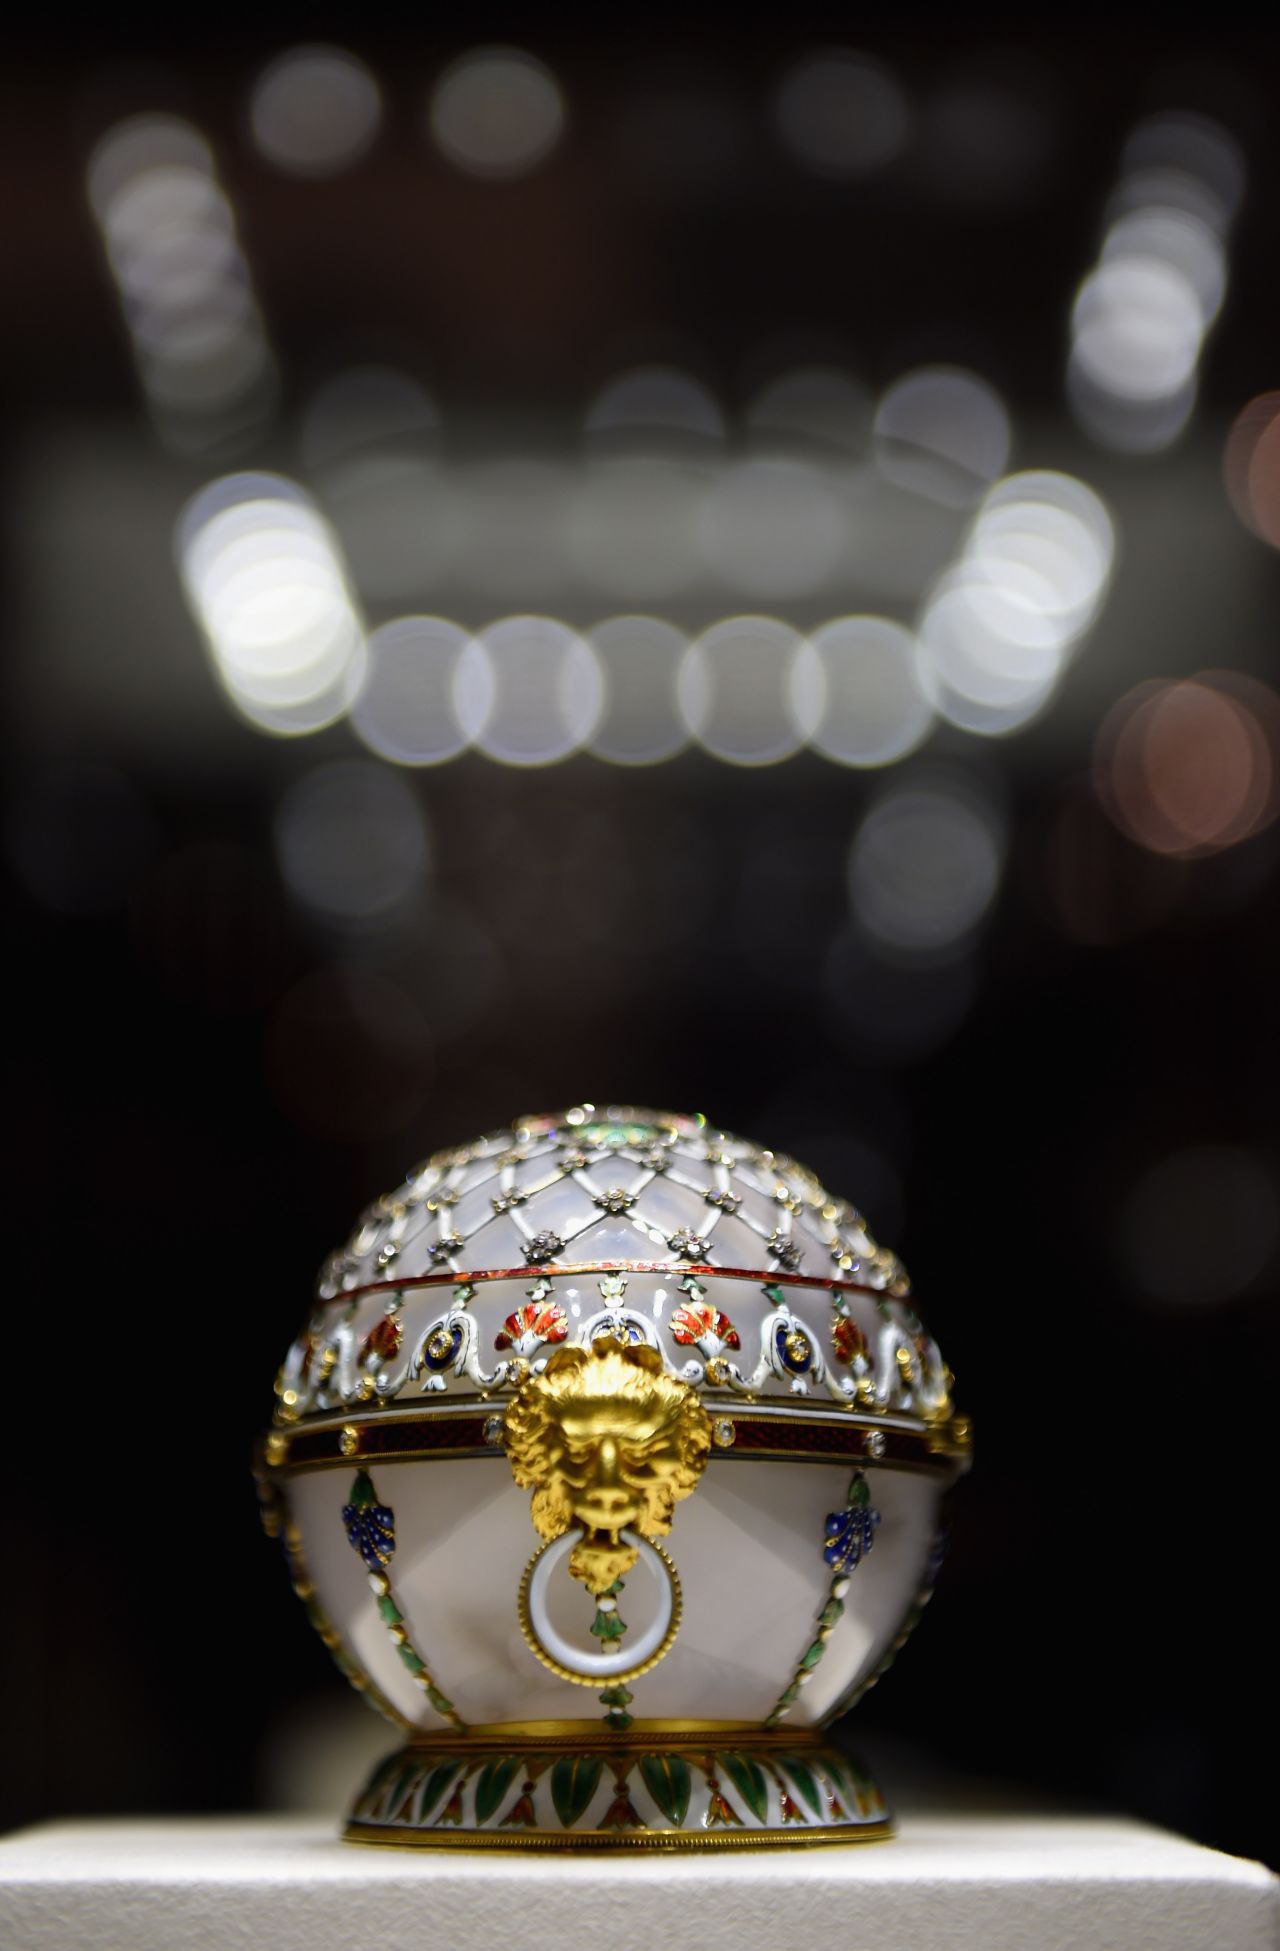 Bored of football? You can always visit St. Petersburg's Faberge Museum ...